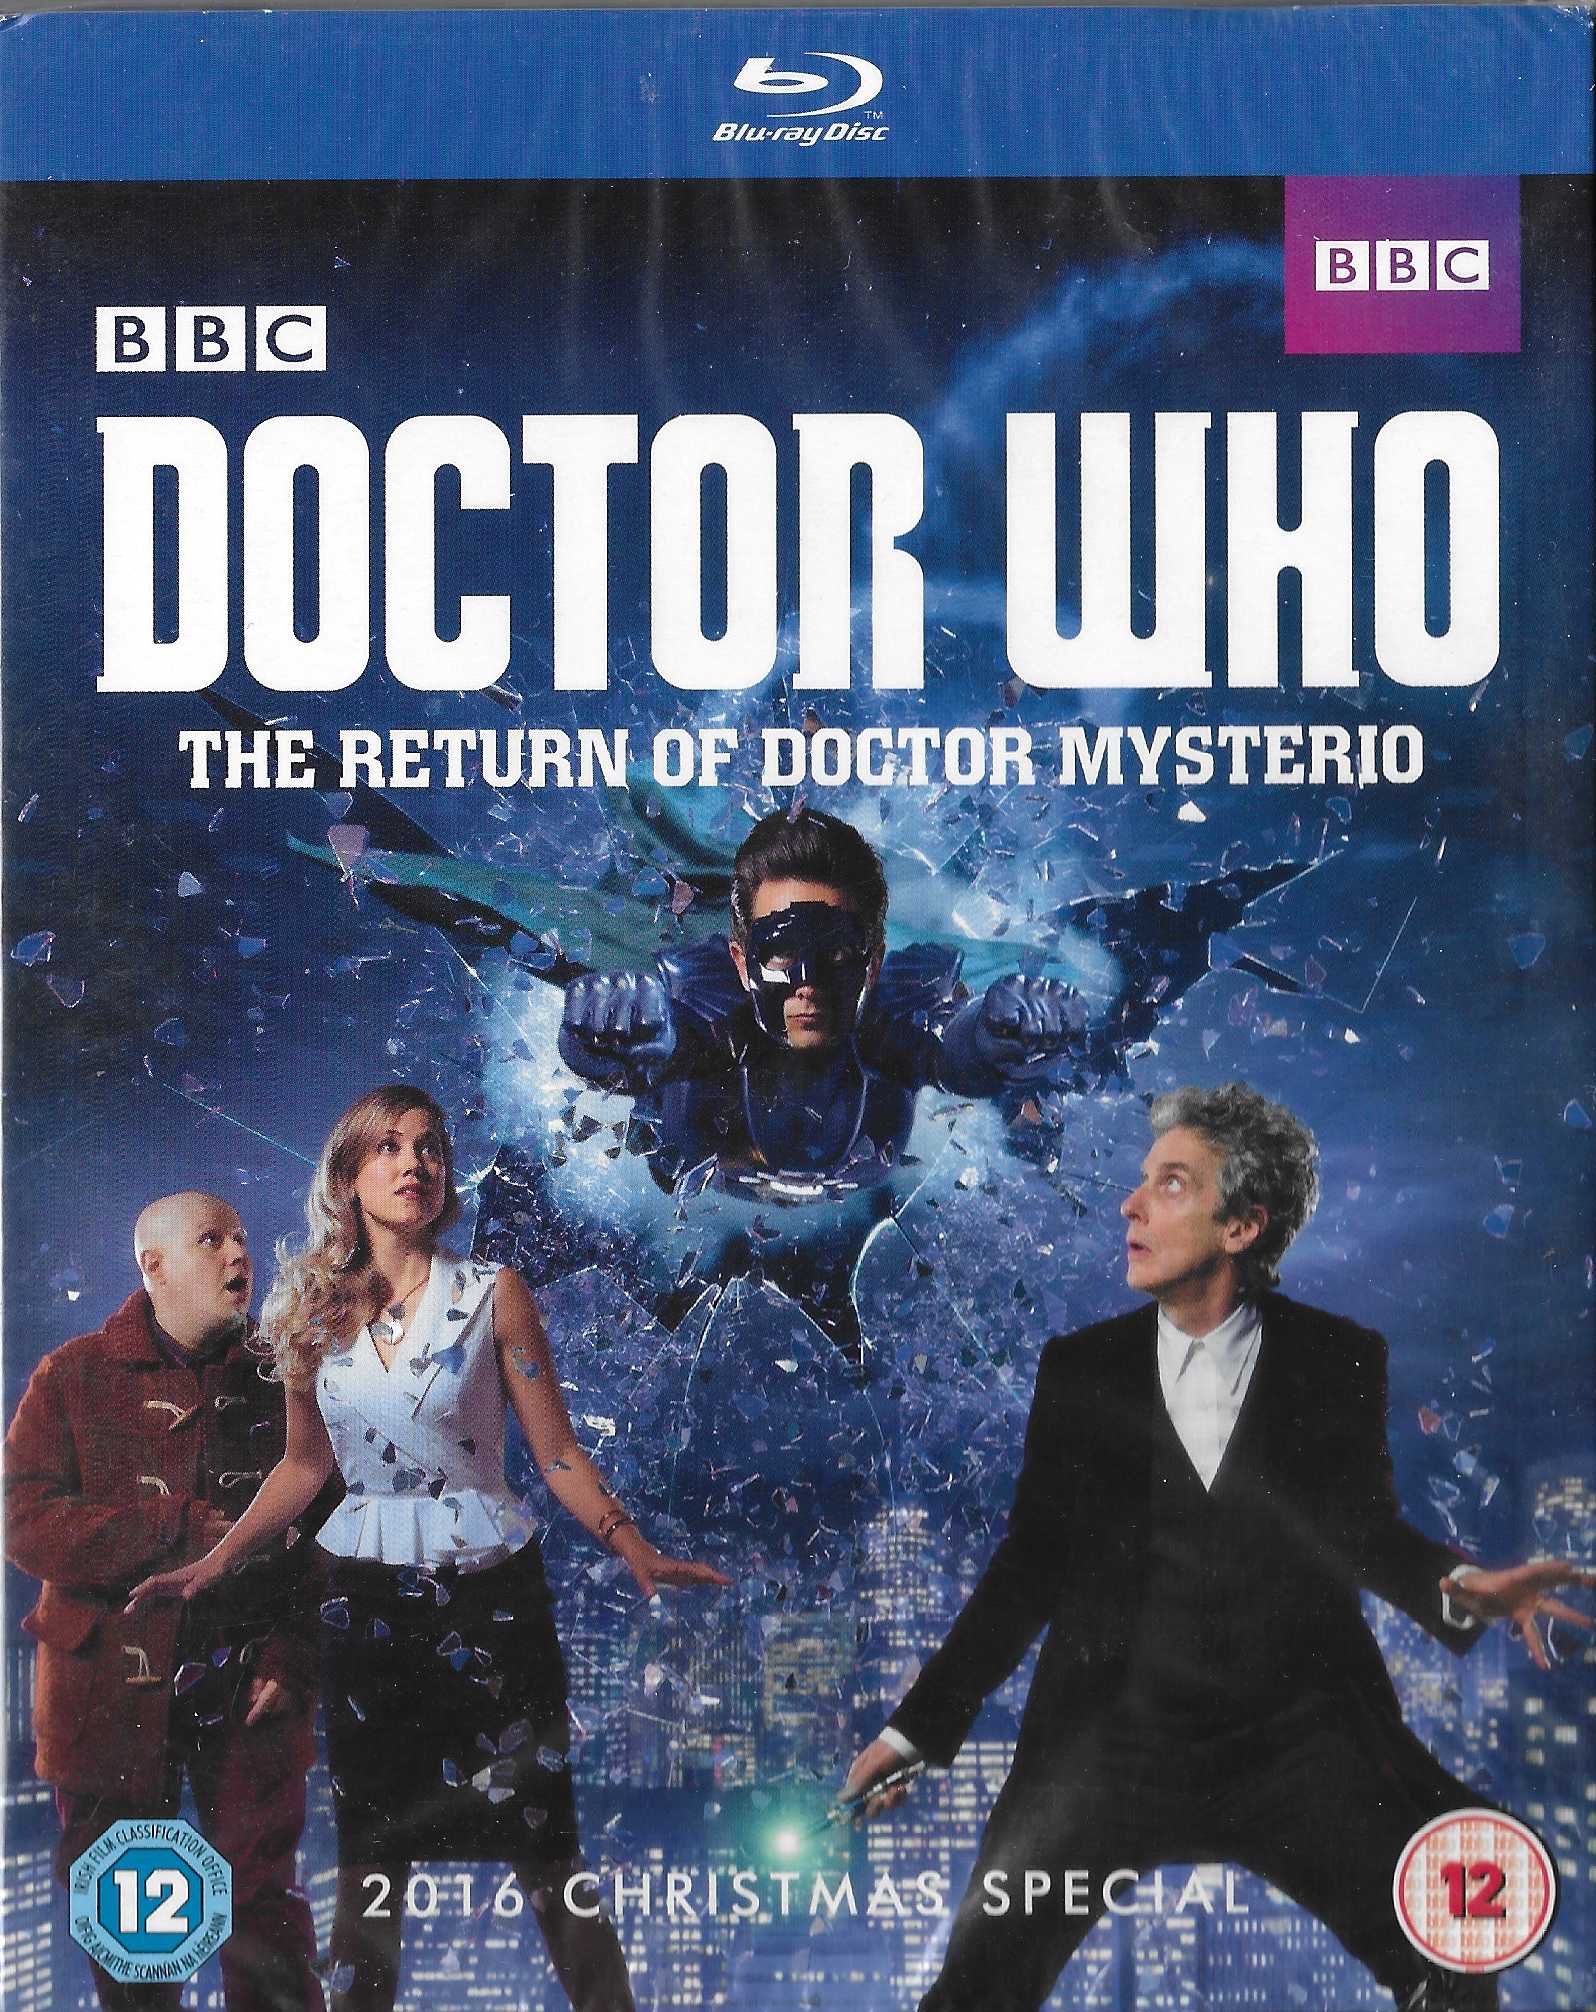 Picture of BBCBD 0391 Doctor Who - The return of Doctor Mysterio (2016 Christmas special) by artist Steven Moffat from the BBC blu-rays - Records and Tapes library